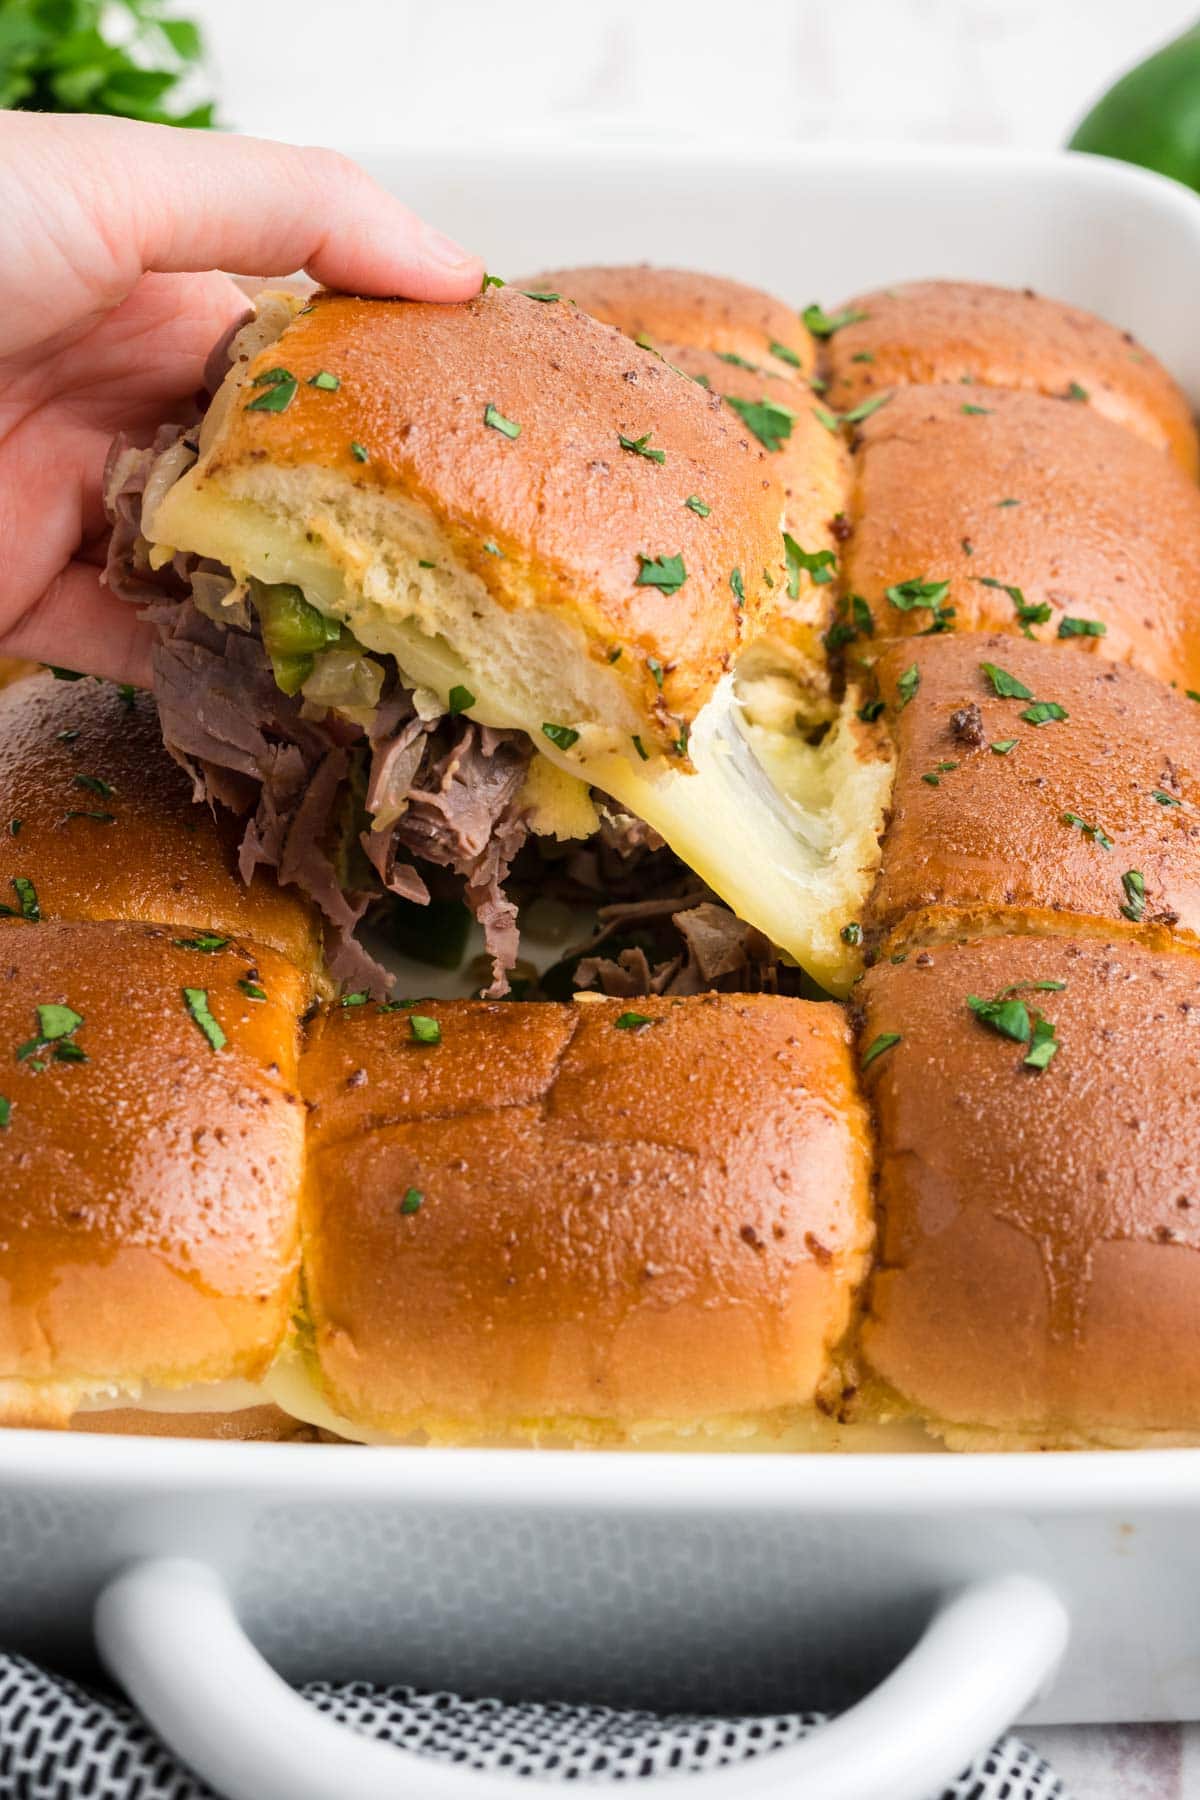 Philly cheesesteak slider being pulled from a plate of sliders.